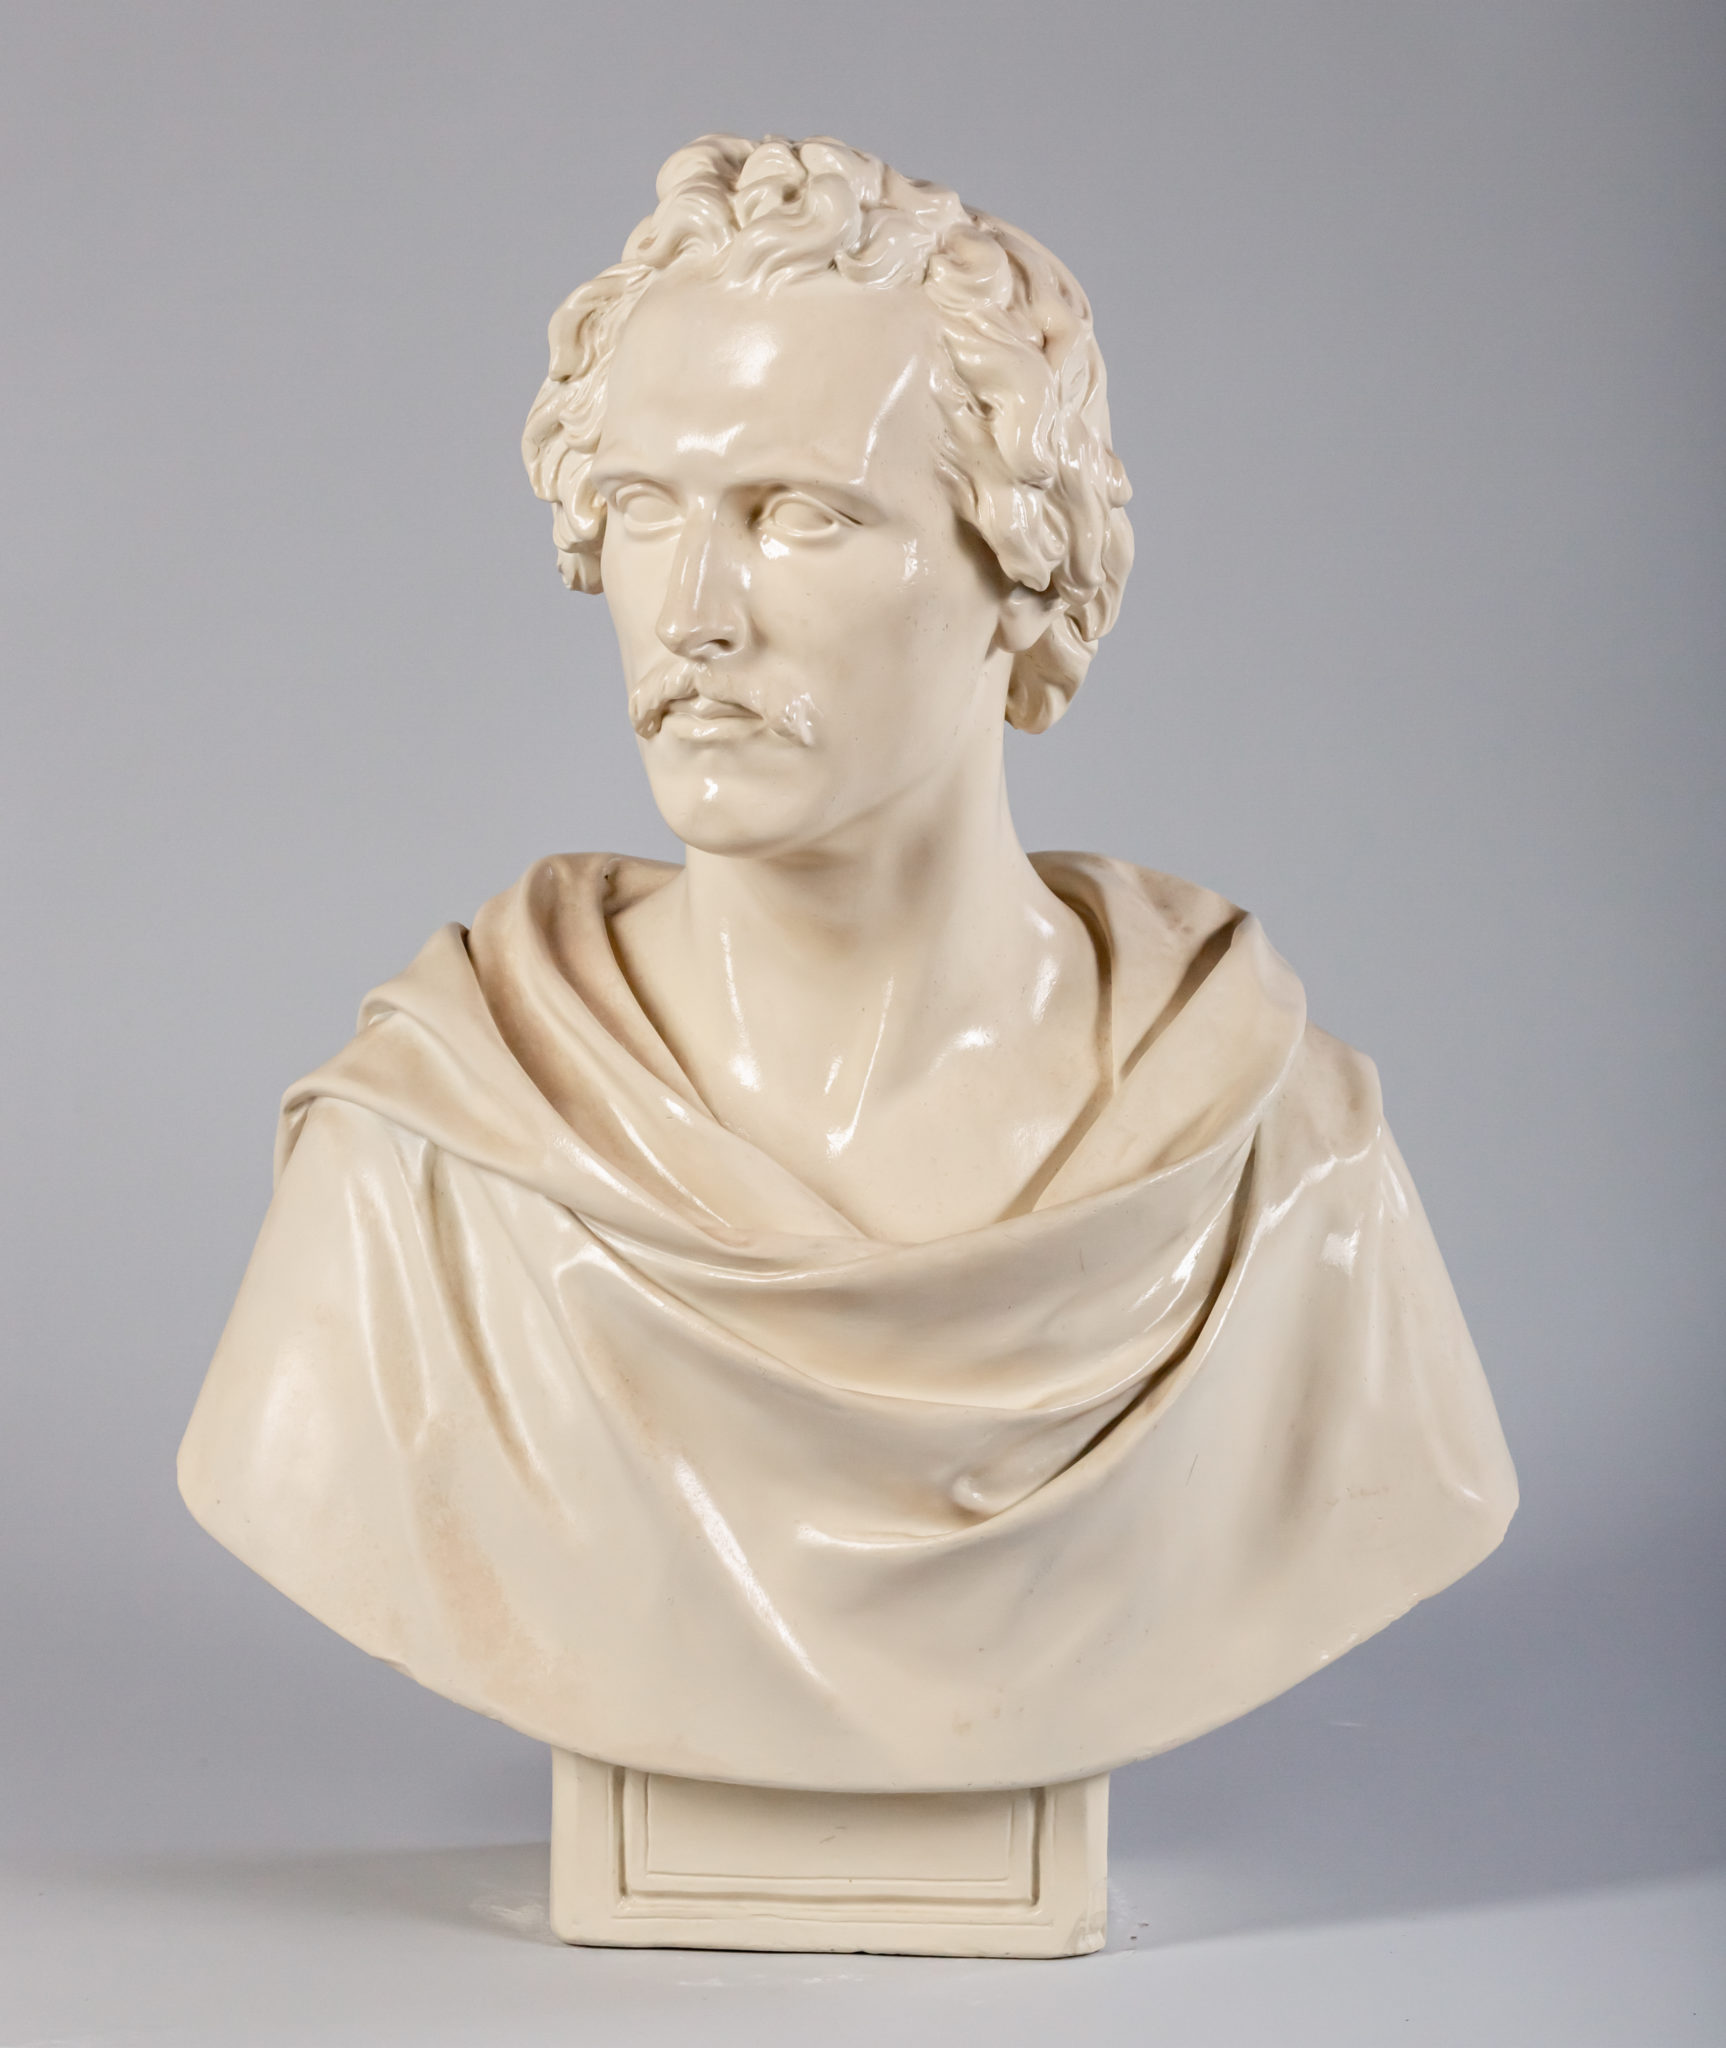 Glazed ceramic bust of a man with short, curly hair and a mustache, draped in a toga.